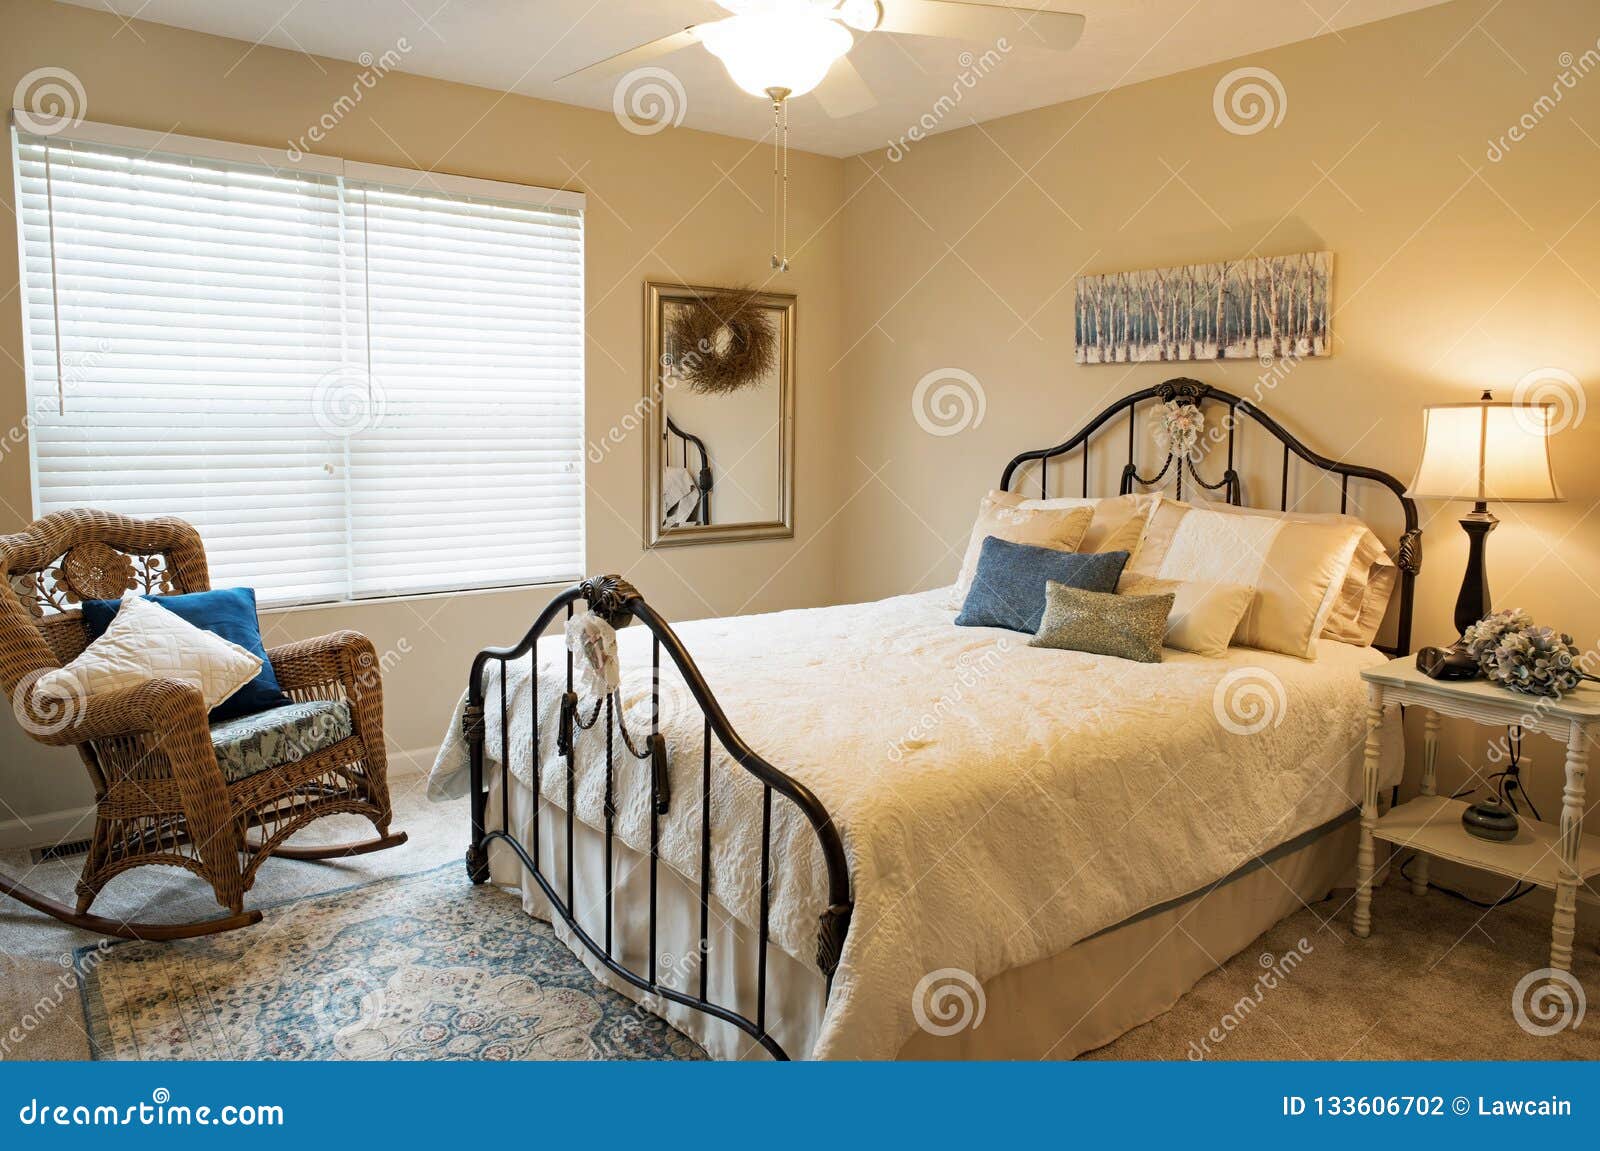 Neutral Bedroom With Iron Bed Editorial Photography Image